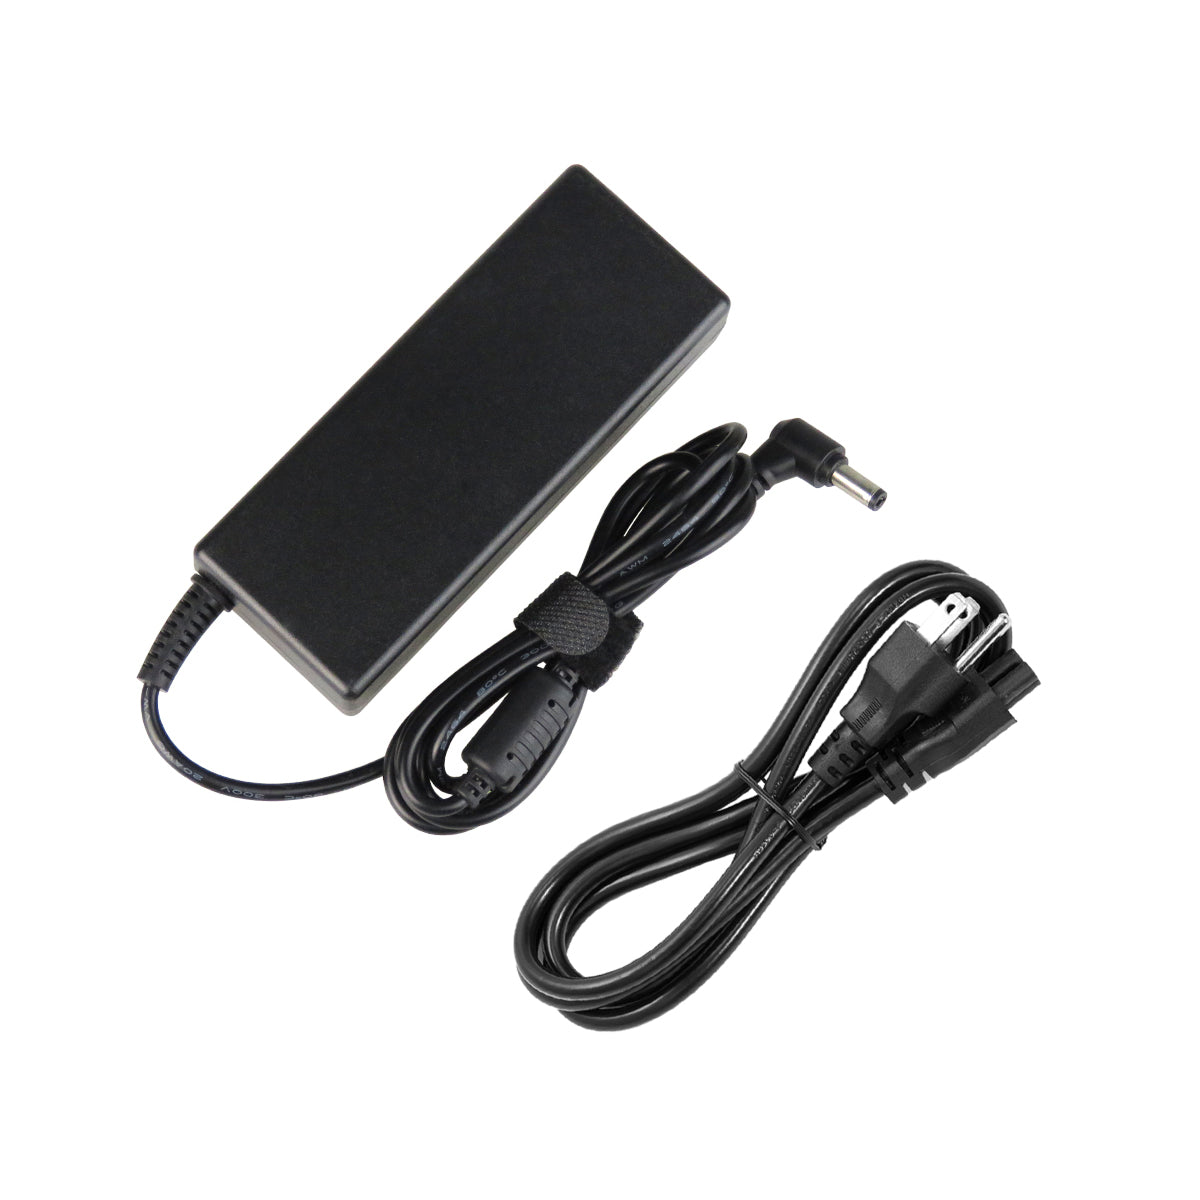 AC Adapter Charger for ASUS A43SJ Notebook.